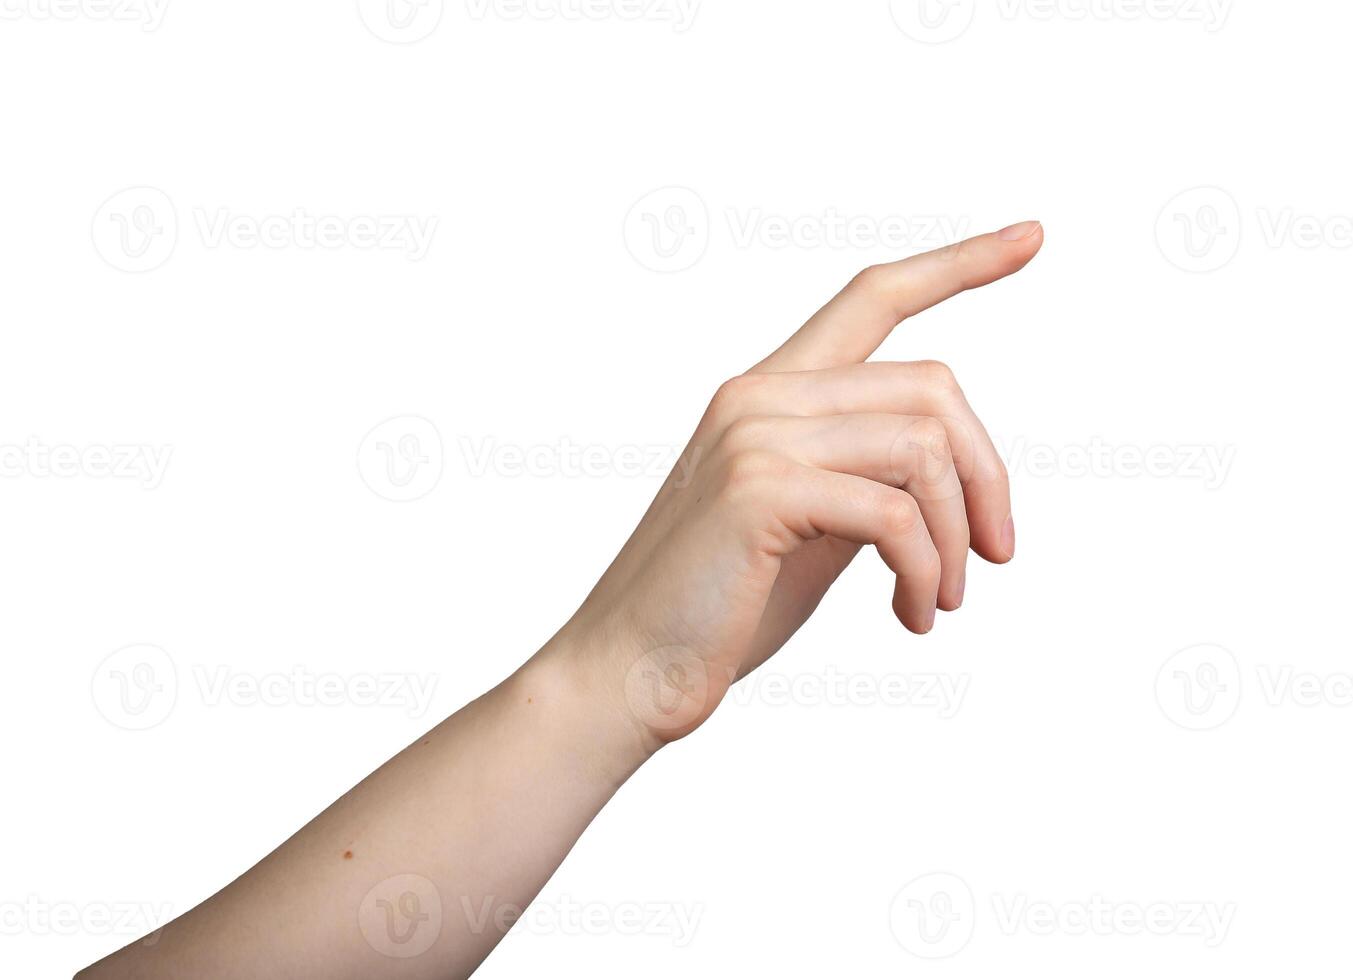 Finger touching something empty, clicking screen, hand gesture isolated photo